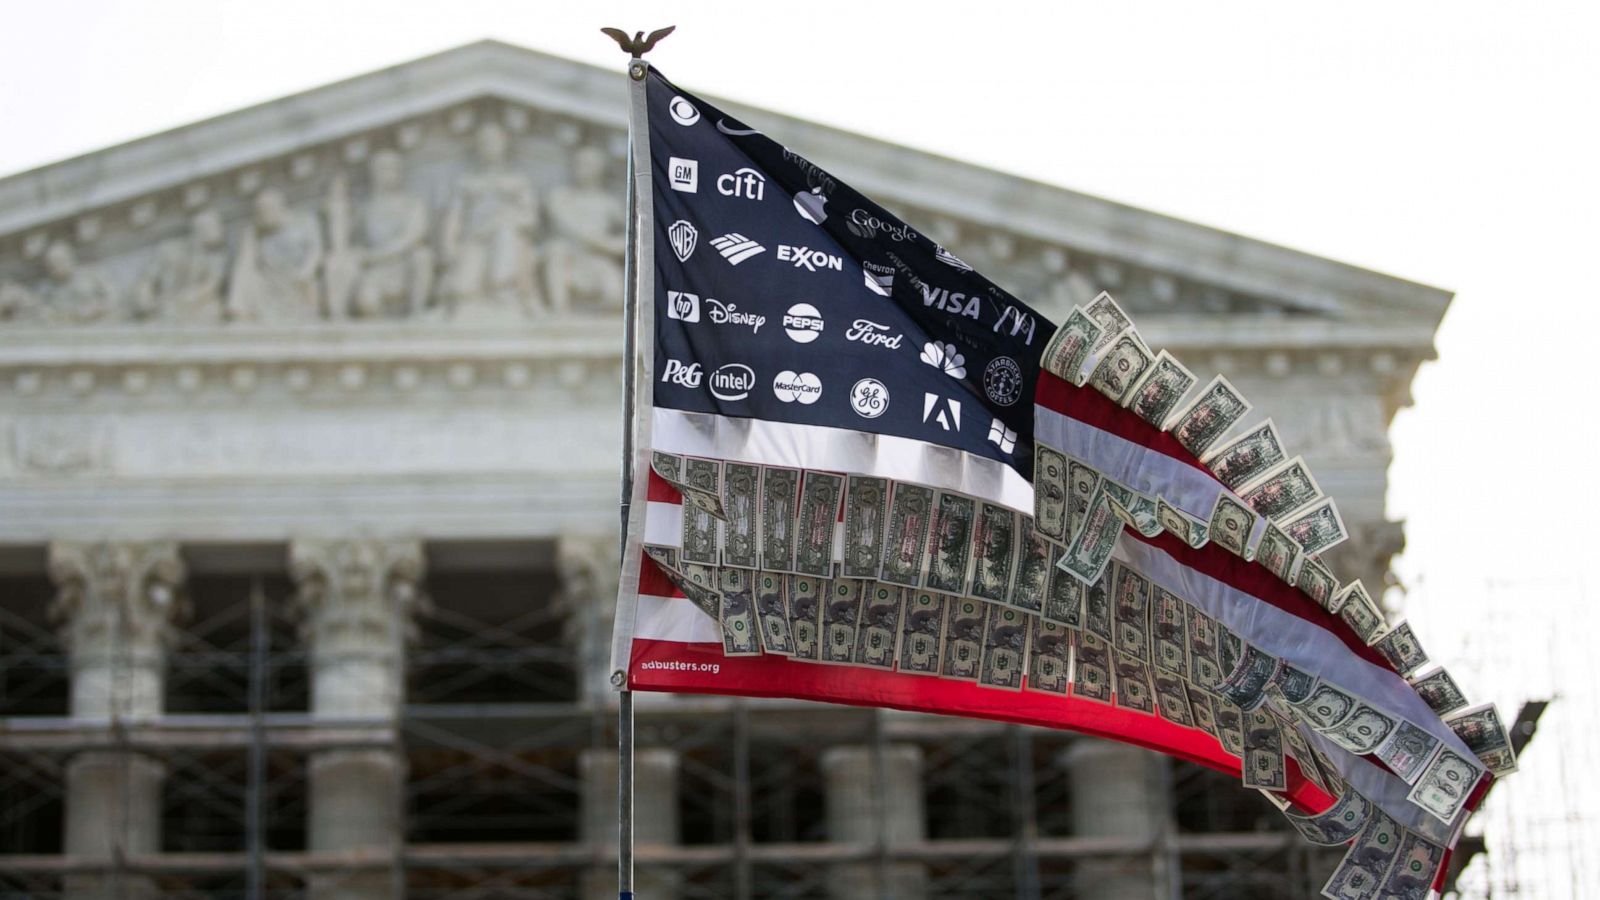 Campaign Finance and the Supreme Court